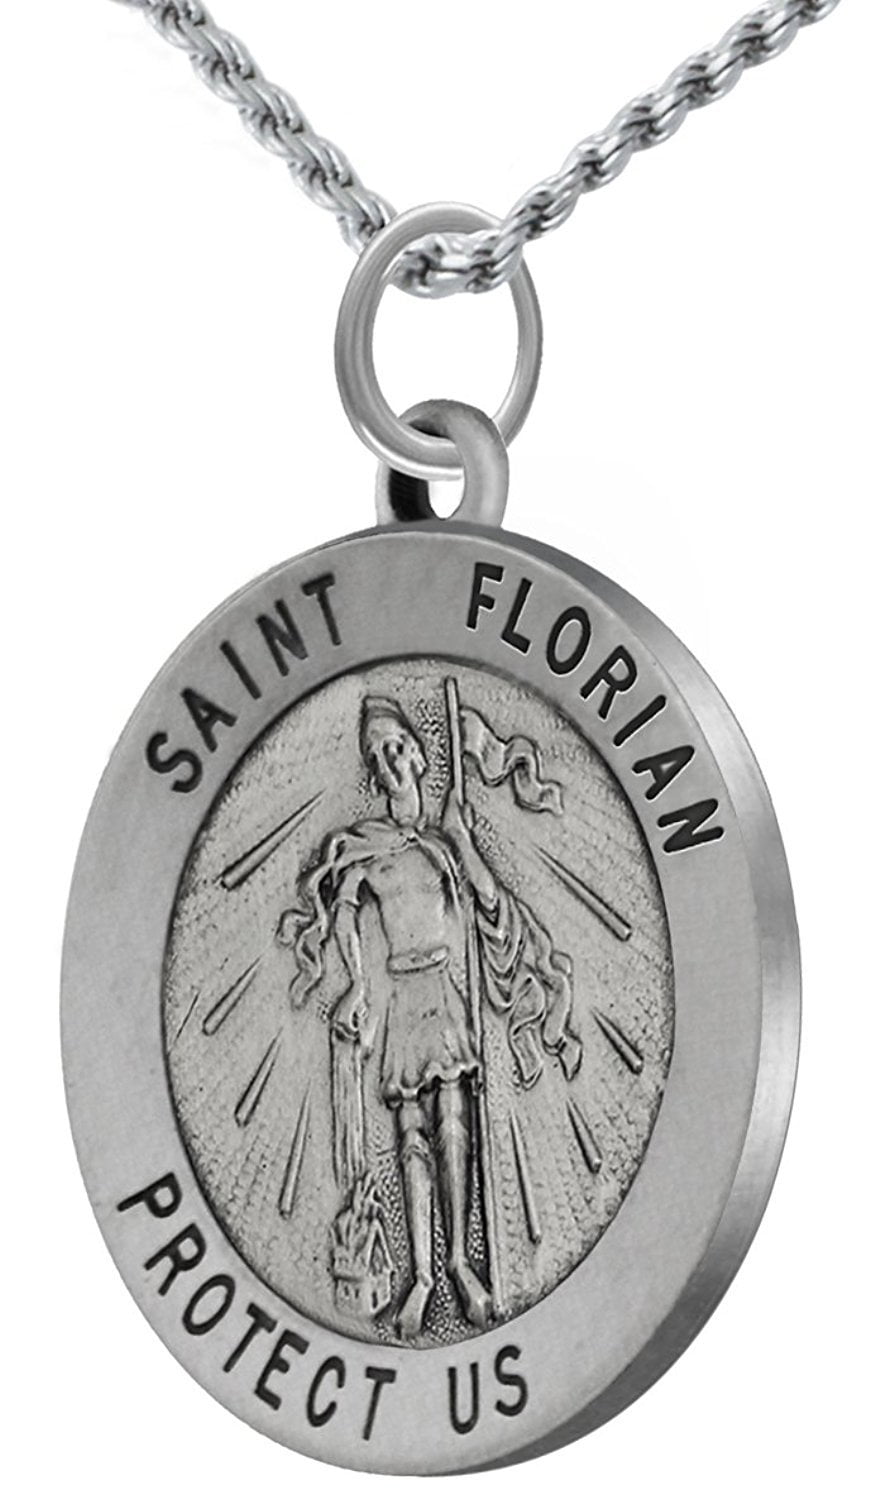 Sterling Silver Antiqued Saint Florian Medal Charm on an Adjustable Chain Necklace 